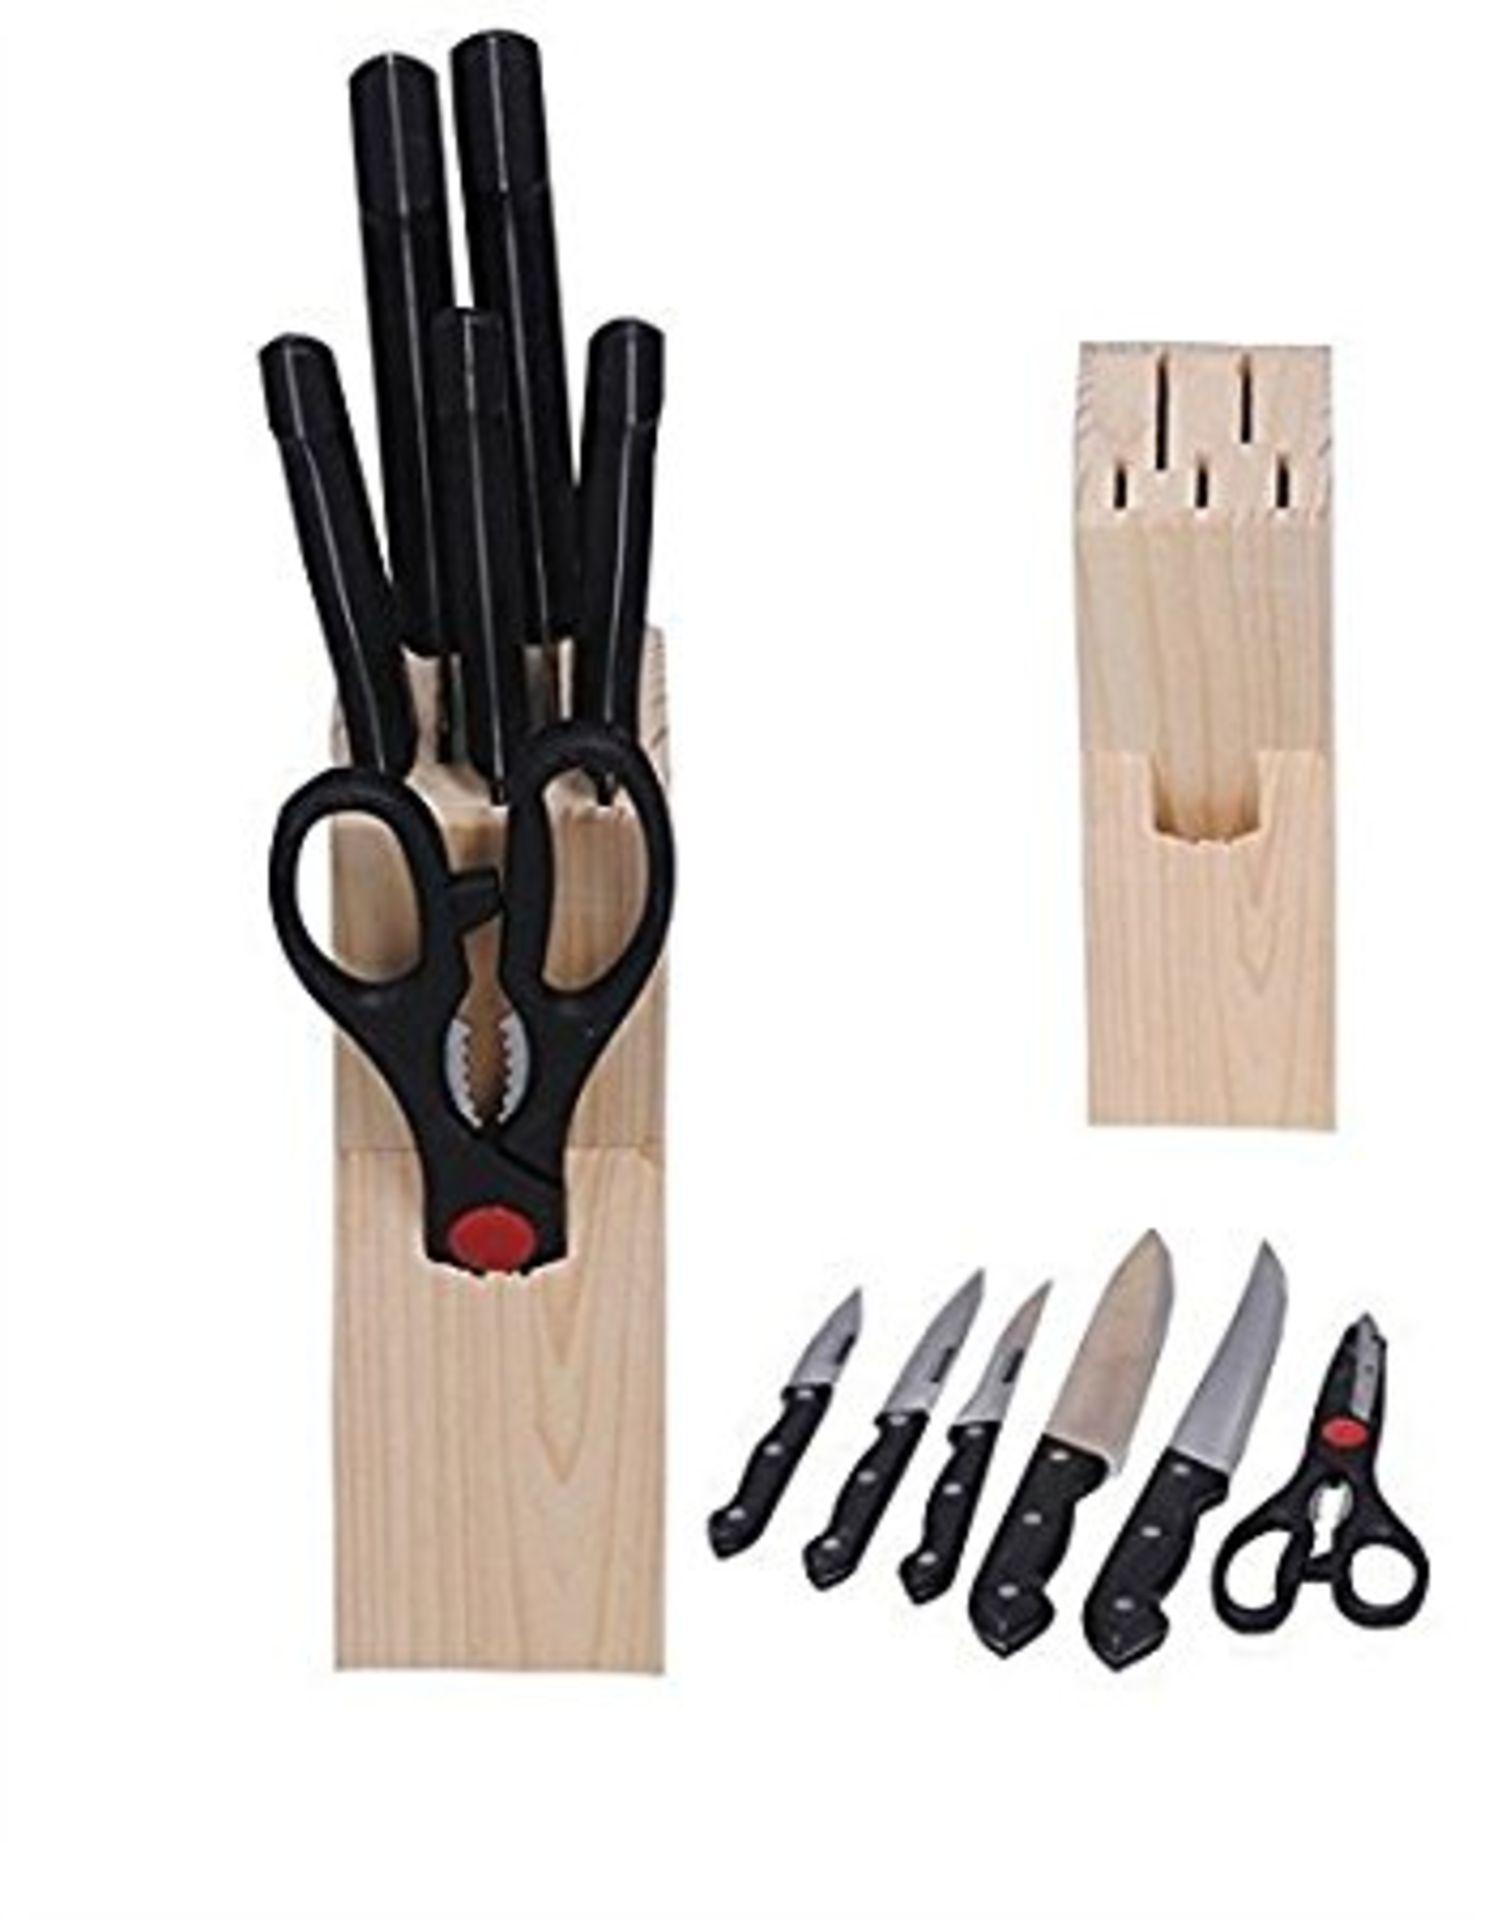 + VAT Brand New 7 Piece Stainless Steel Knife Set With Wooden Block - Includes - Paring Knife - All